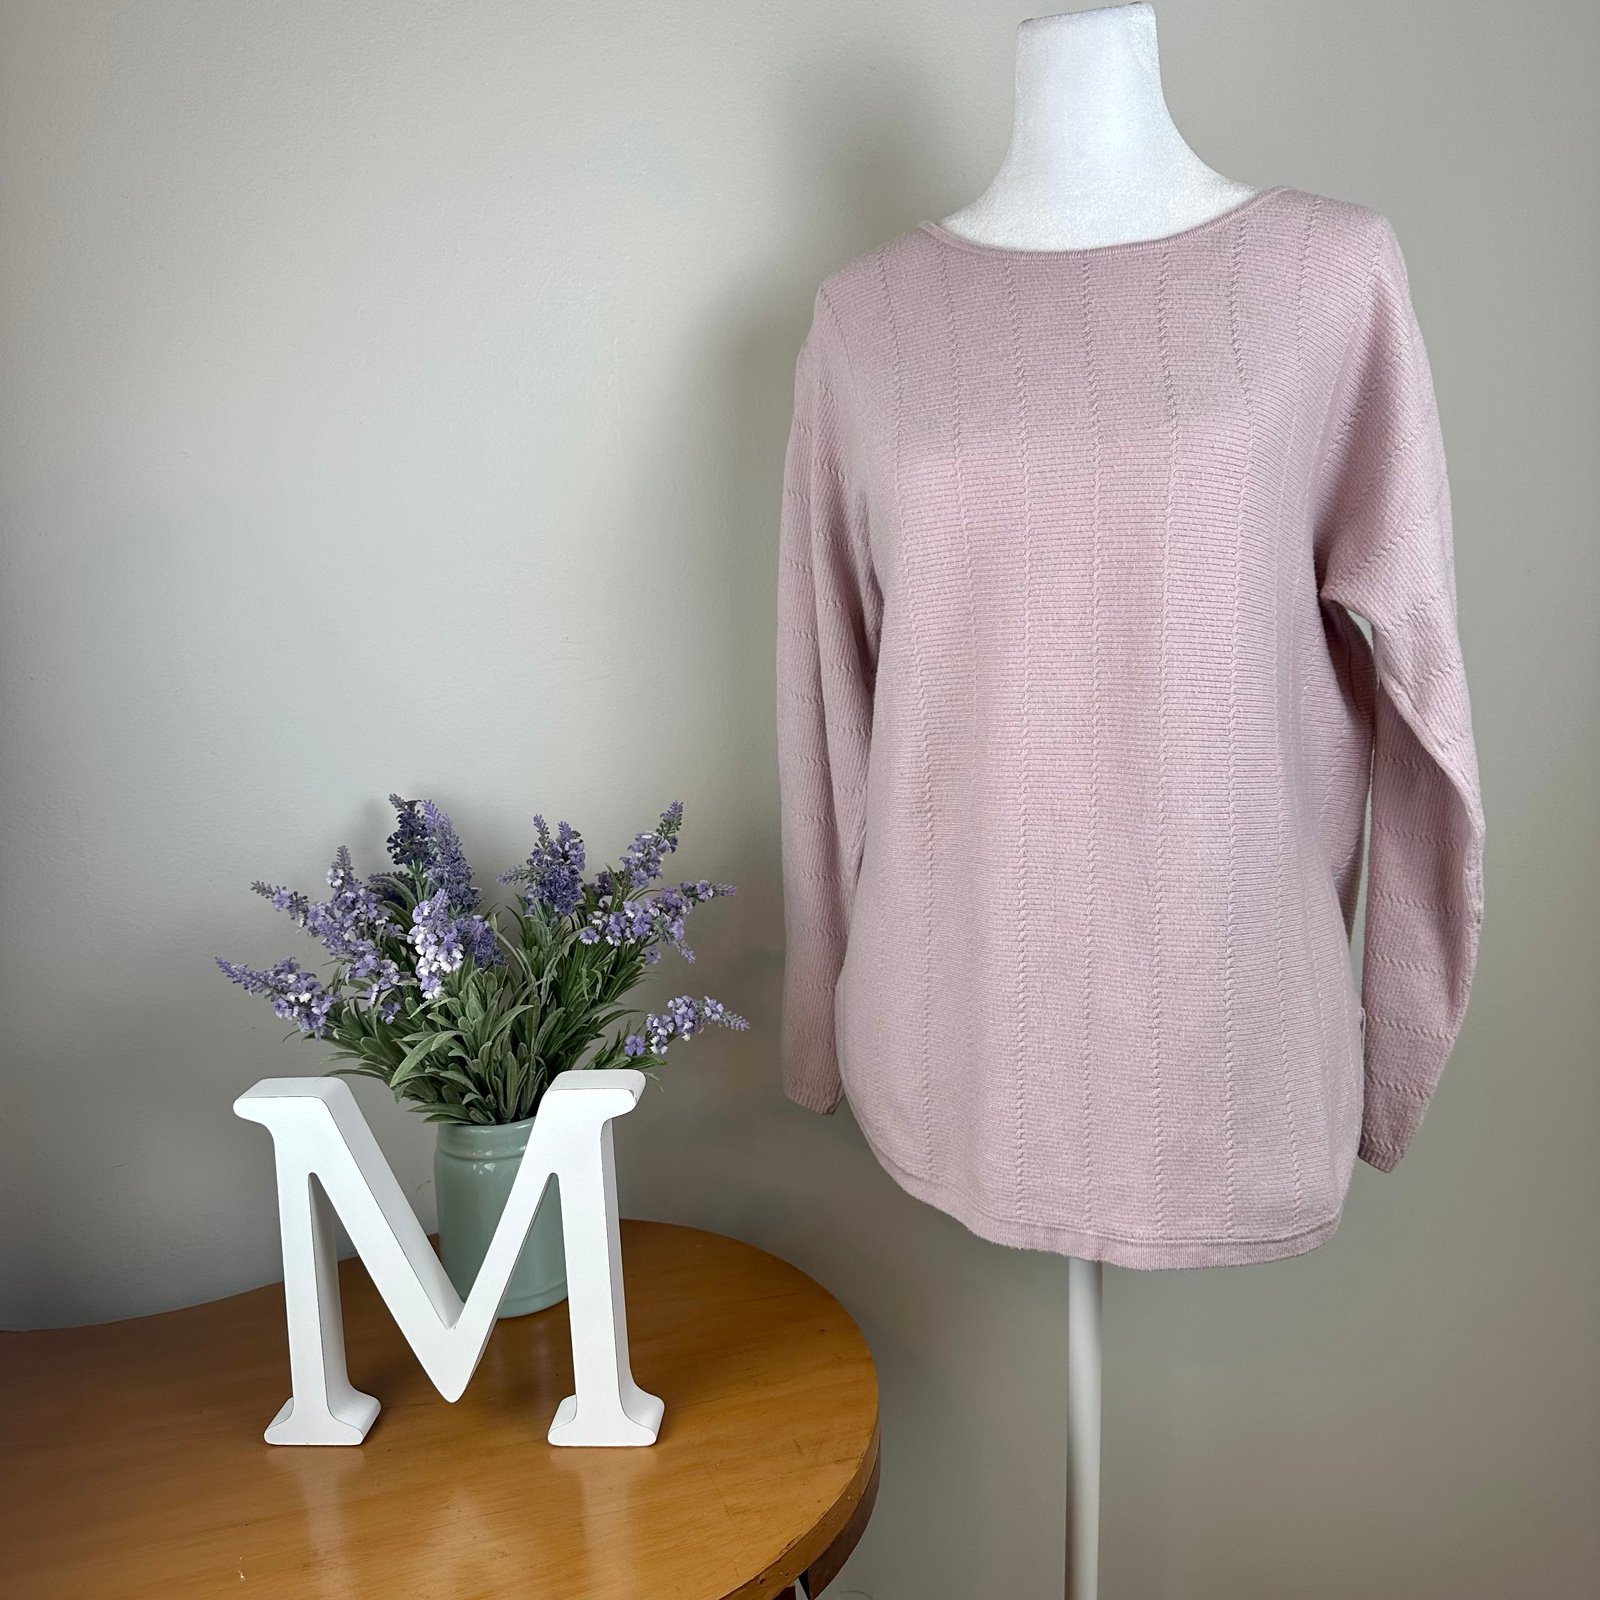 Popular Grace Pale Pink Rounded Hem Sweater - Size Smal